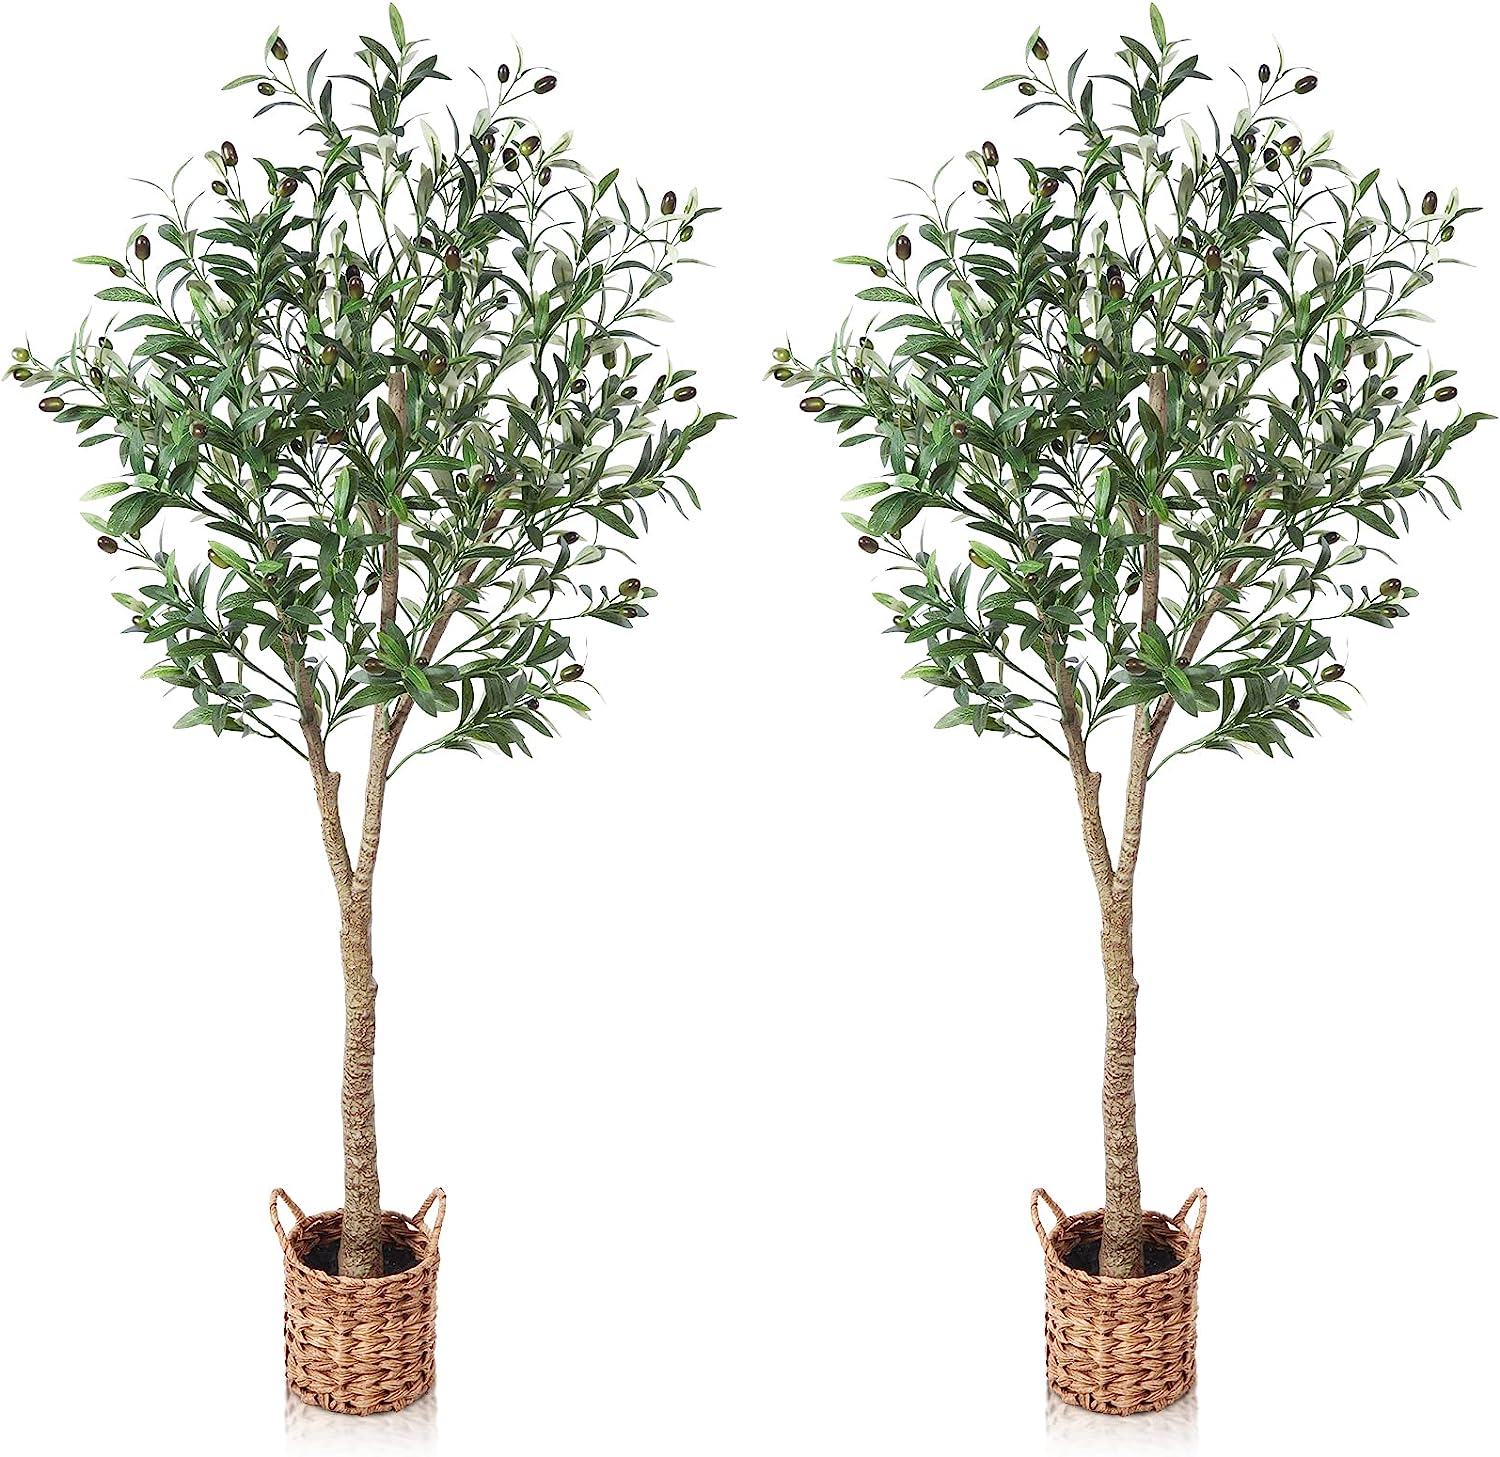 Artificial Olive Tree 4ft Tall Fake Plant, with Handmade Woven Basket Planter. Graceland Home and Living